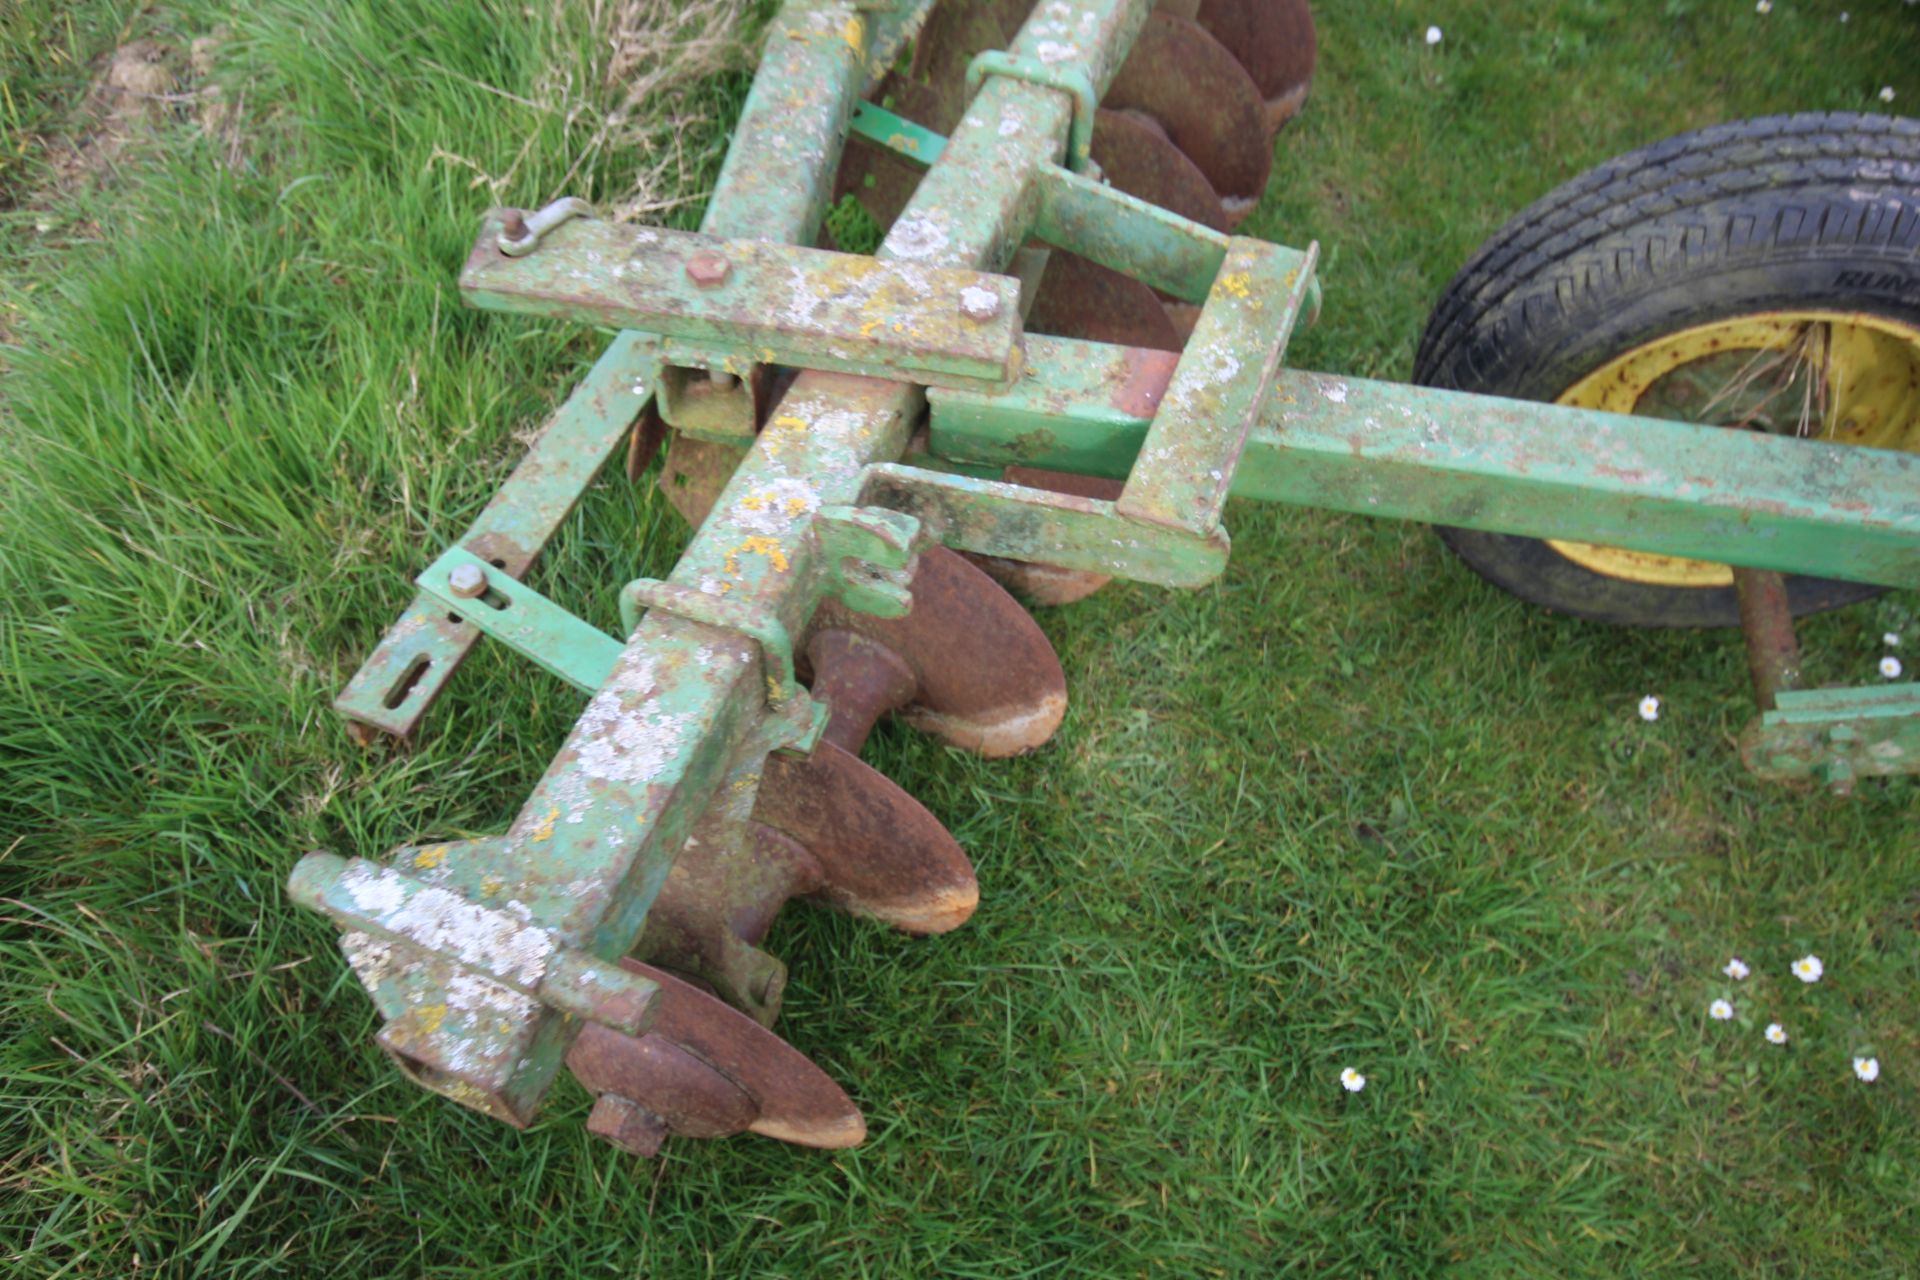 John Deere 3.5m trailed discs. For sale due to retirement. V - Image 12 of 15